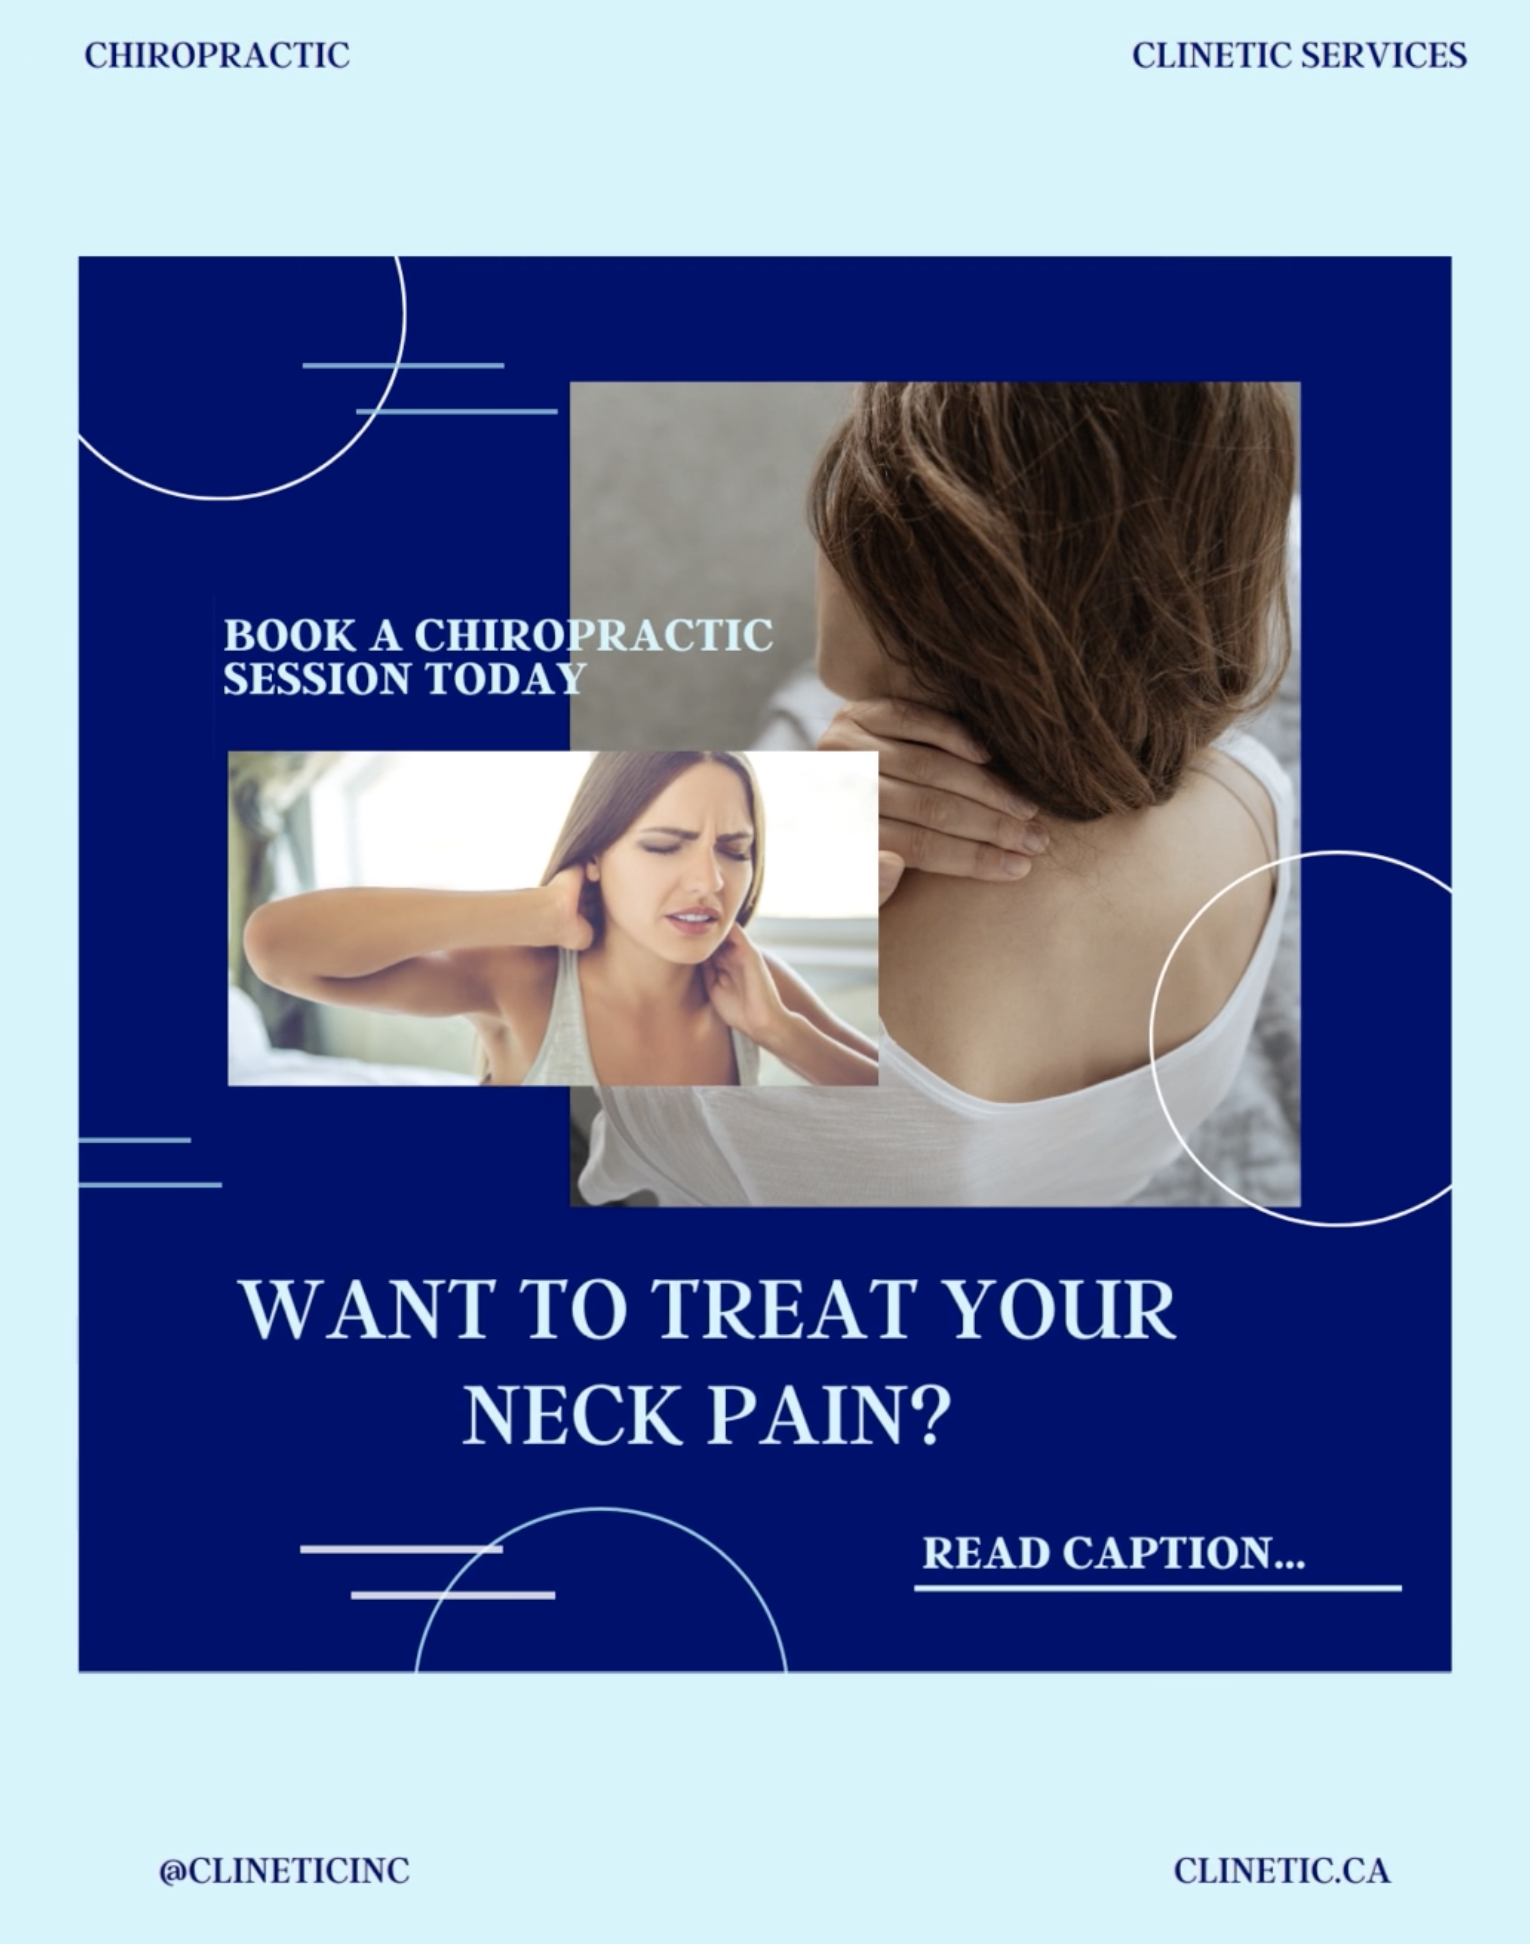 Want to treat your neck pain?